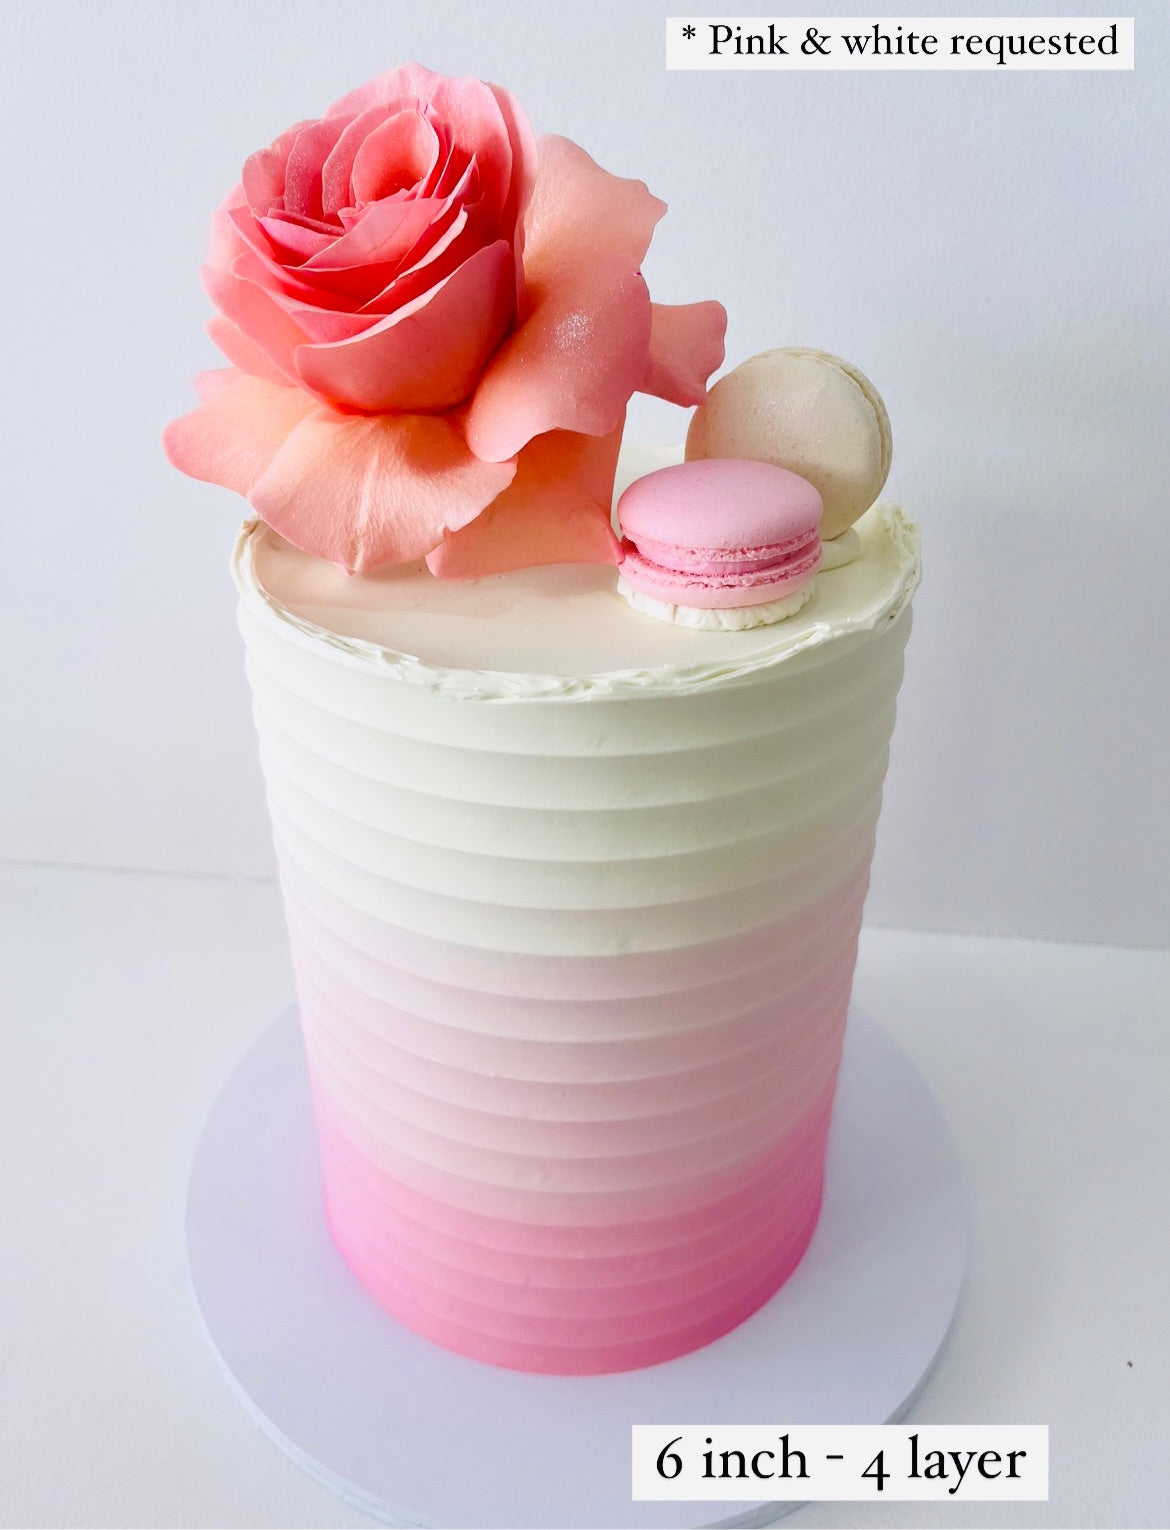 OMBRE CAKE Tutorial - YouTube